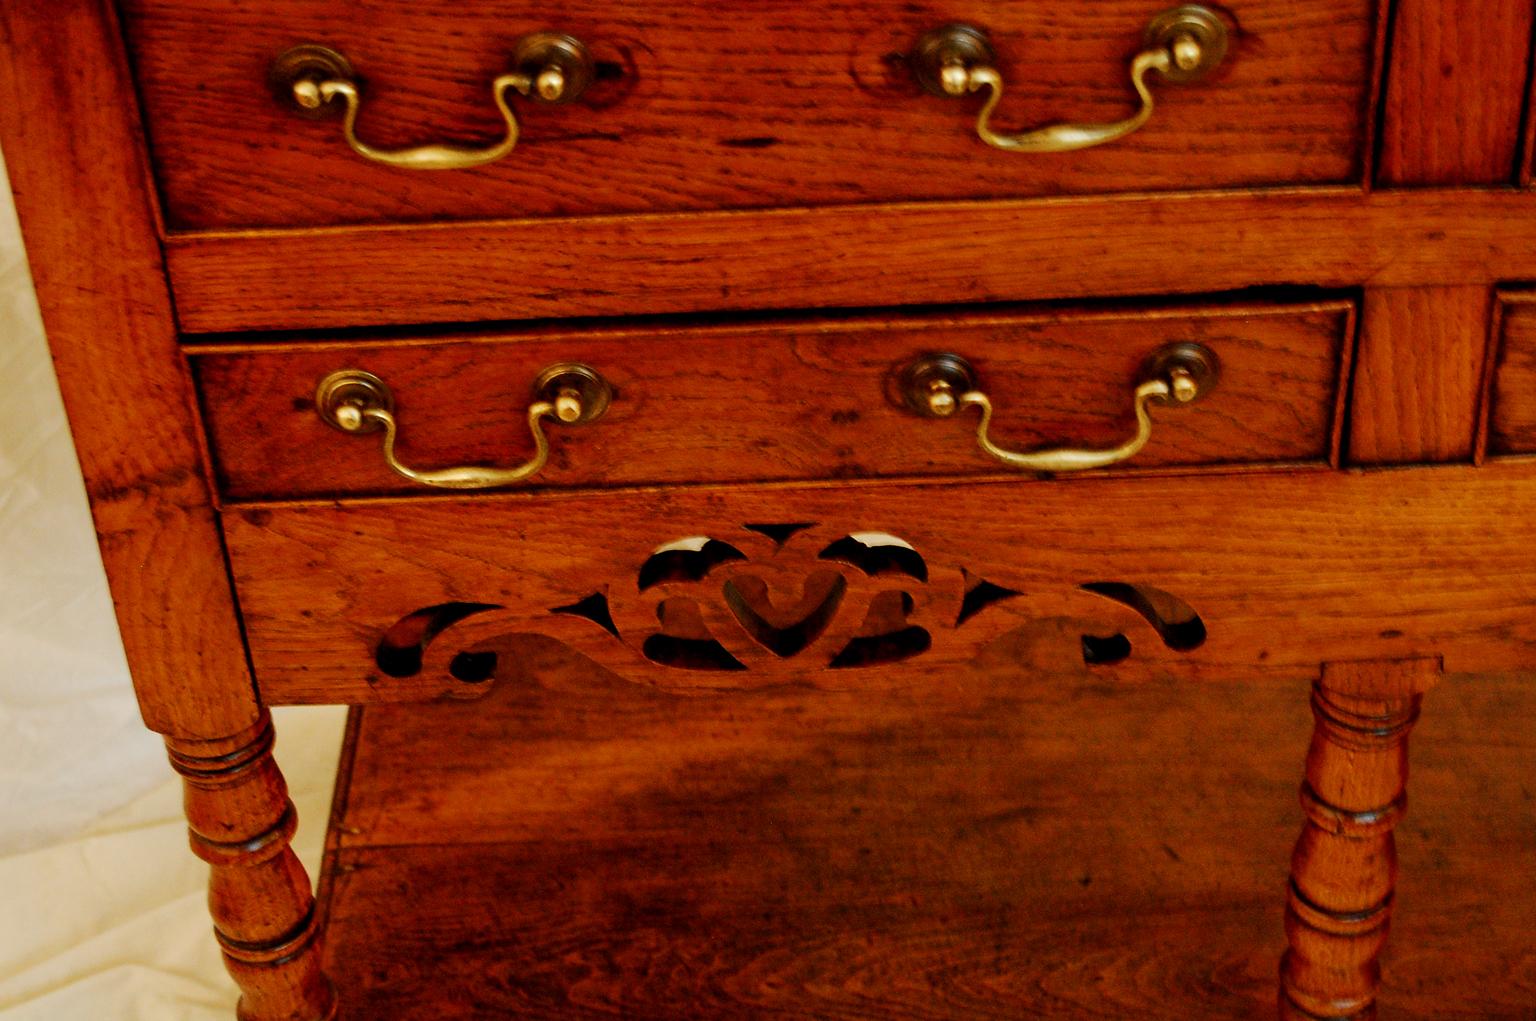 Welsh Georgian oak potboard dresser base with six drawers, turned legs, lower potboard shelf. This small dresser base, only five feet long, has an intricate pierced skirt which includes the heart motif. Very often that symbolizes that this was a